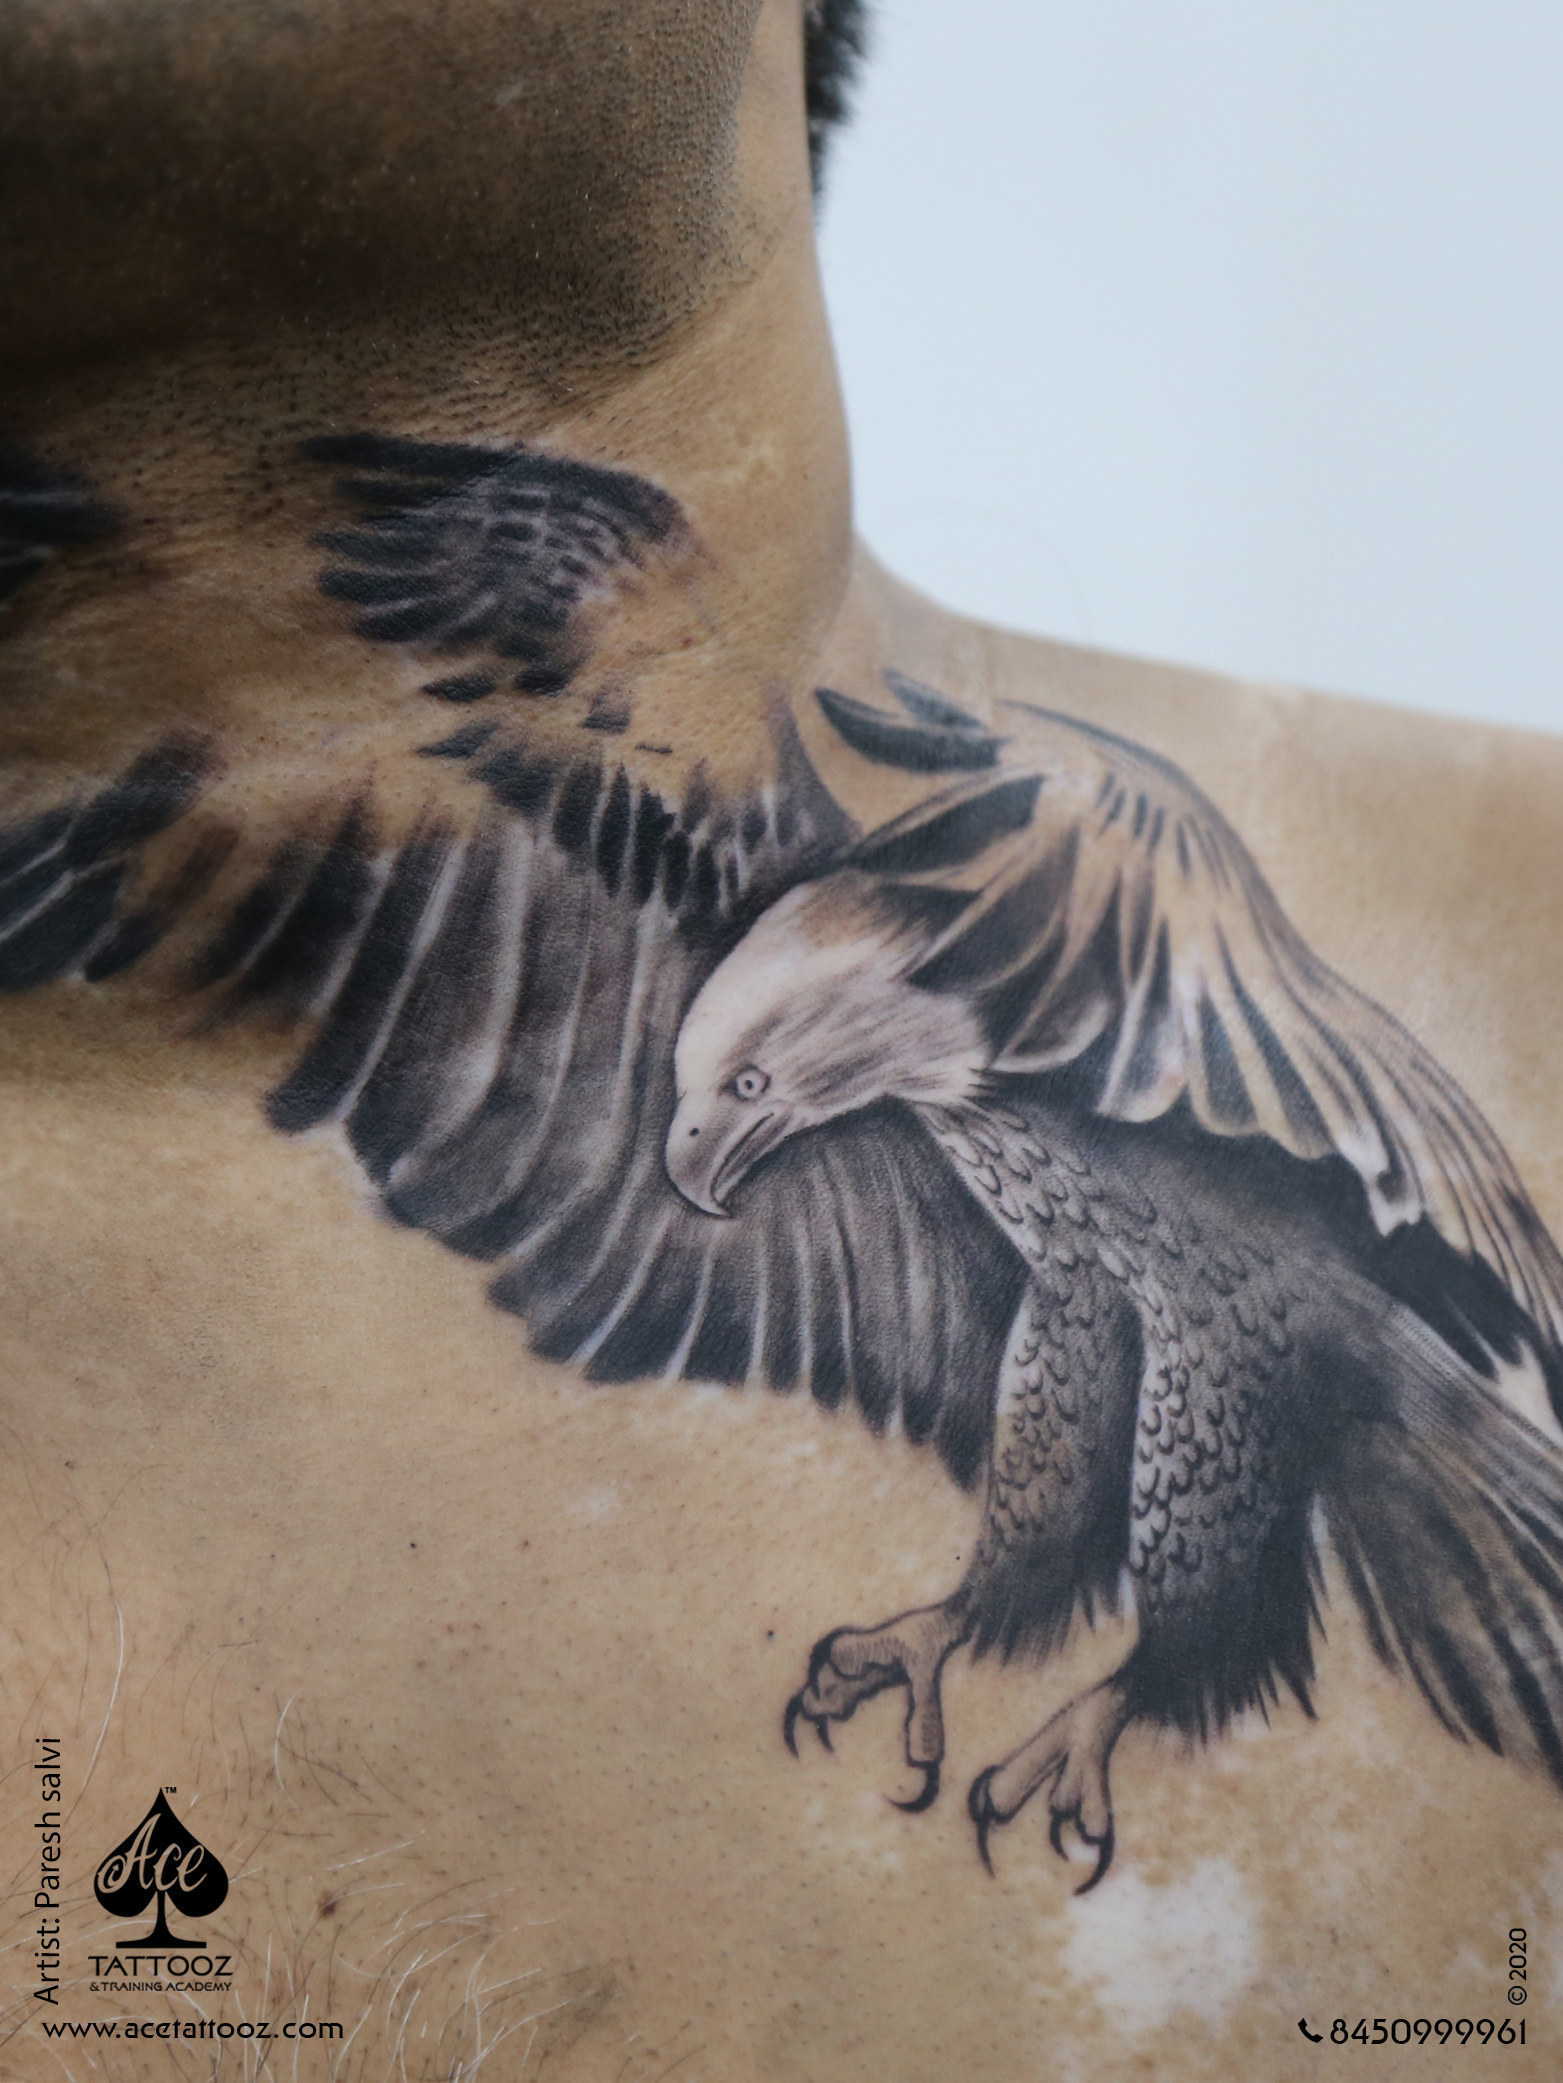 Tattoo Cover Up in Melbourne | Cover Up Tattoo - Vic Market Tattoo